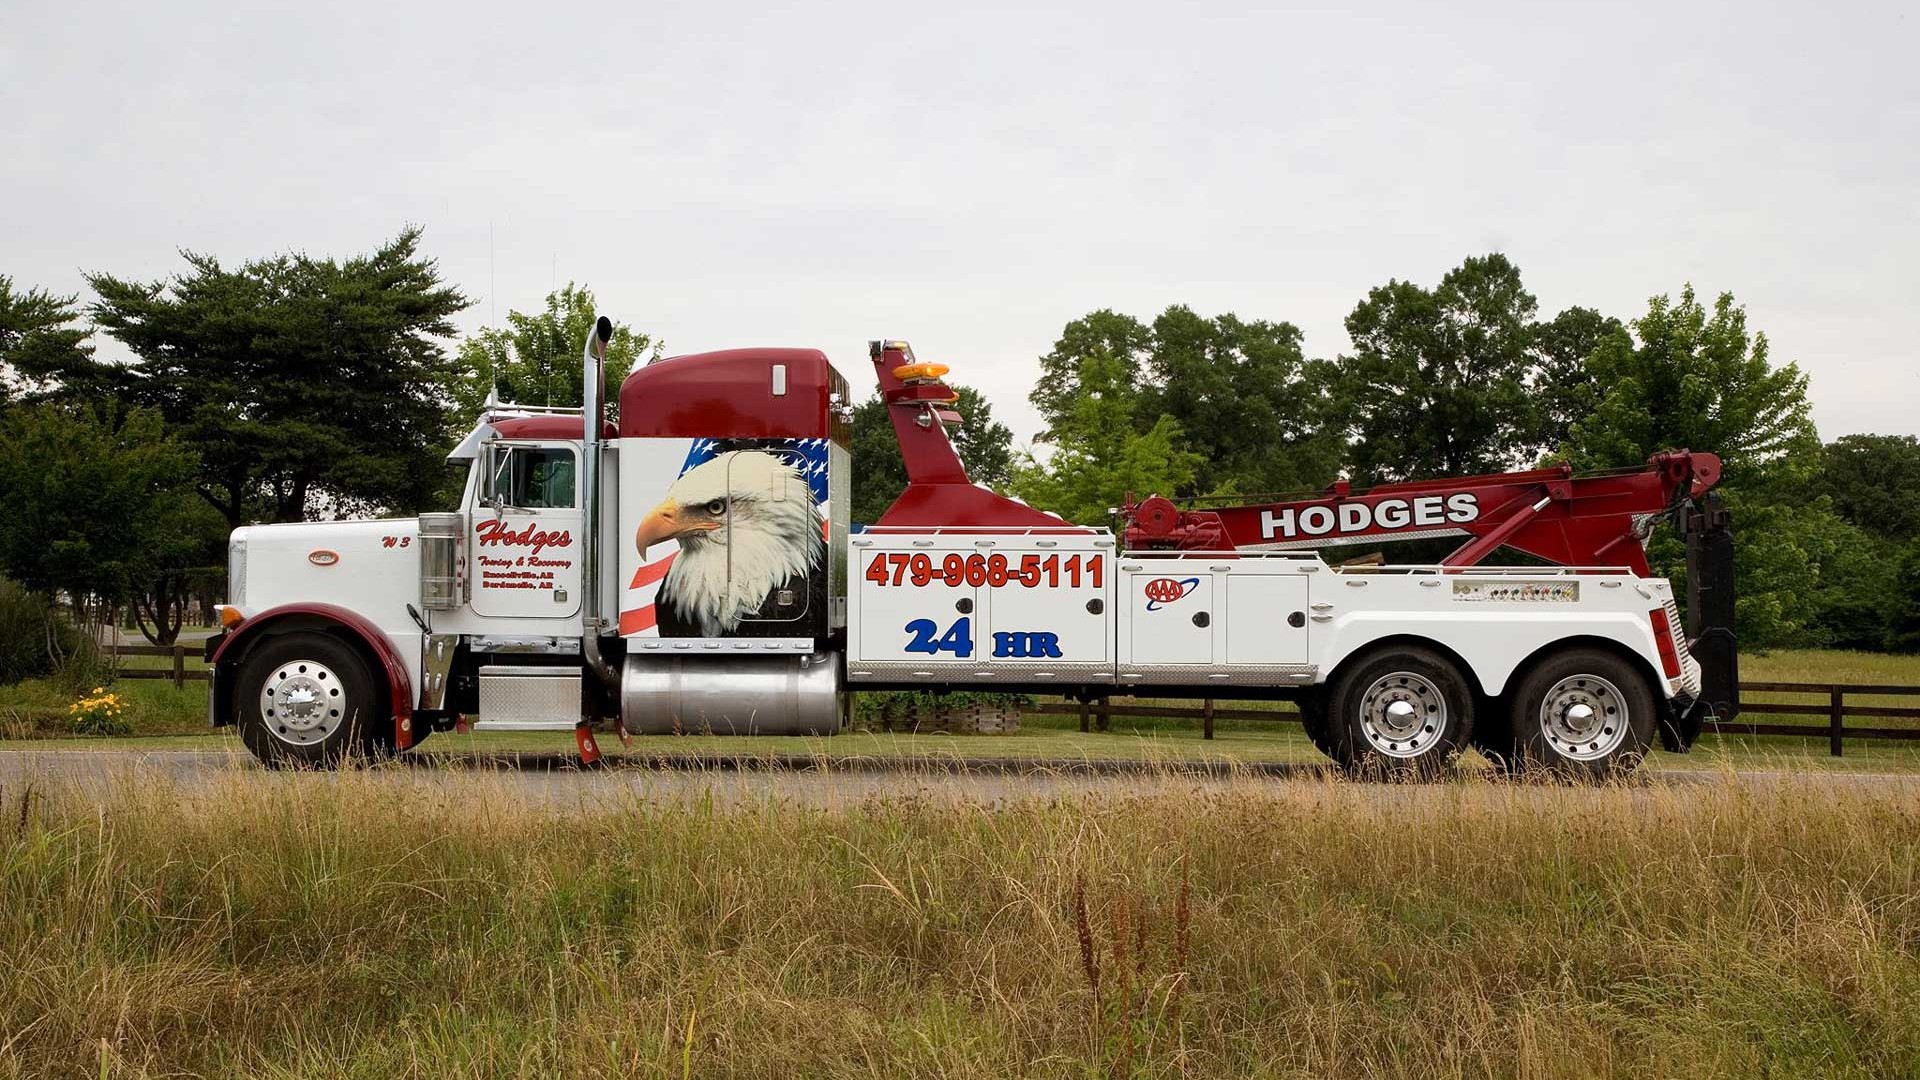 Hodges Towing & Recovery